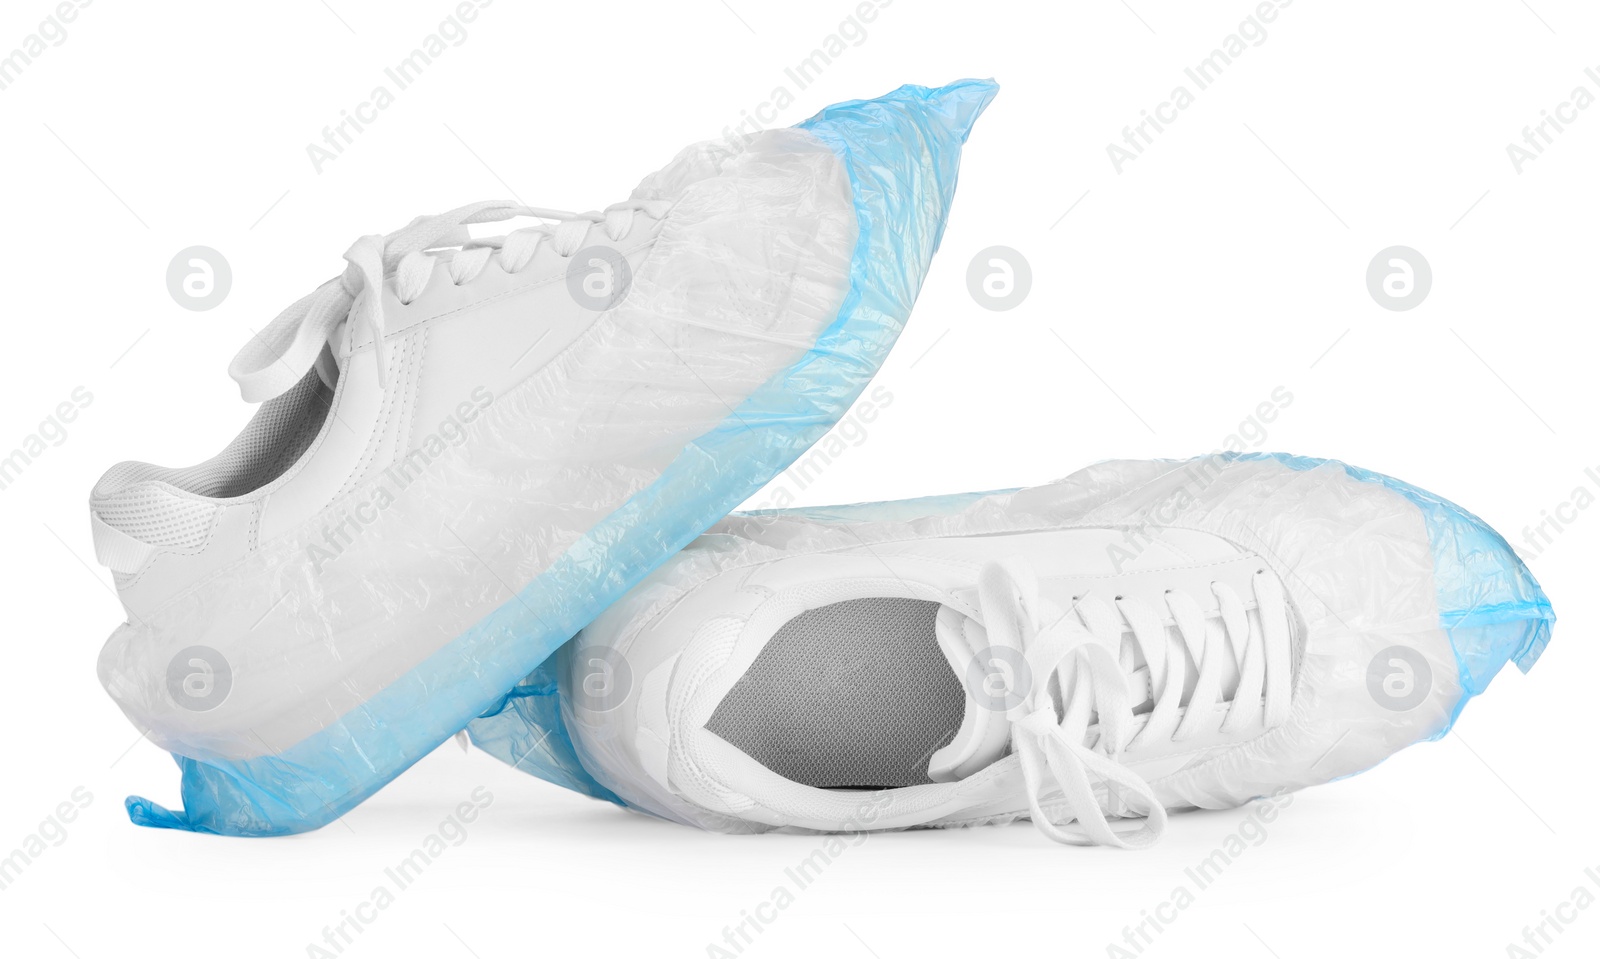 Photo of Sneakers in shoe covers isolated on white